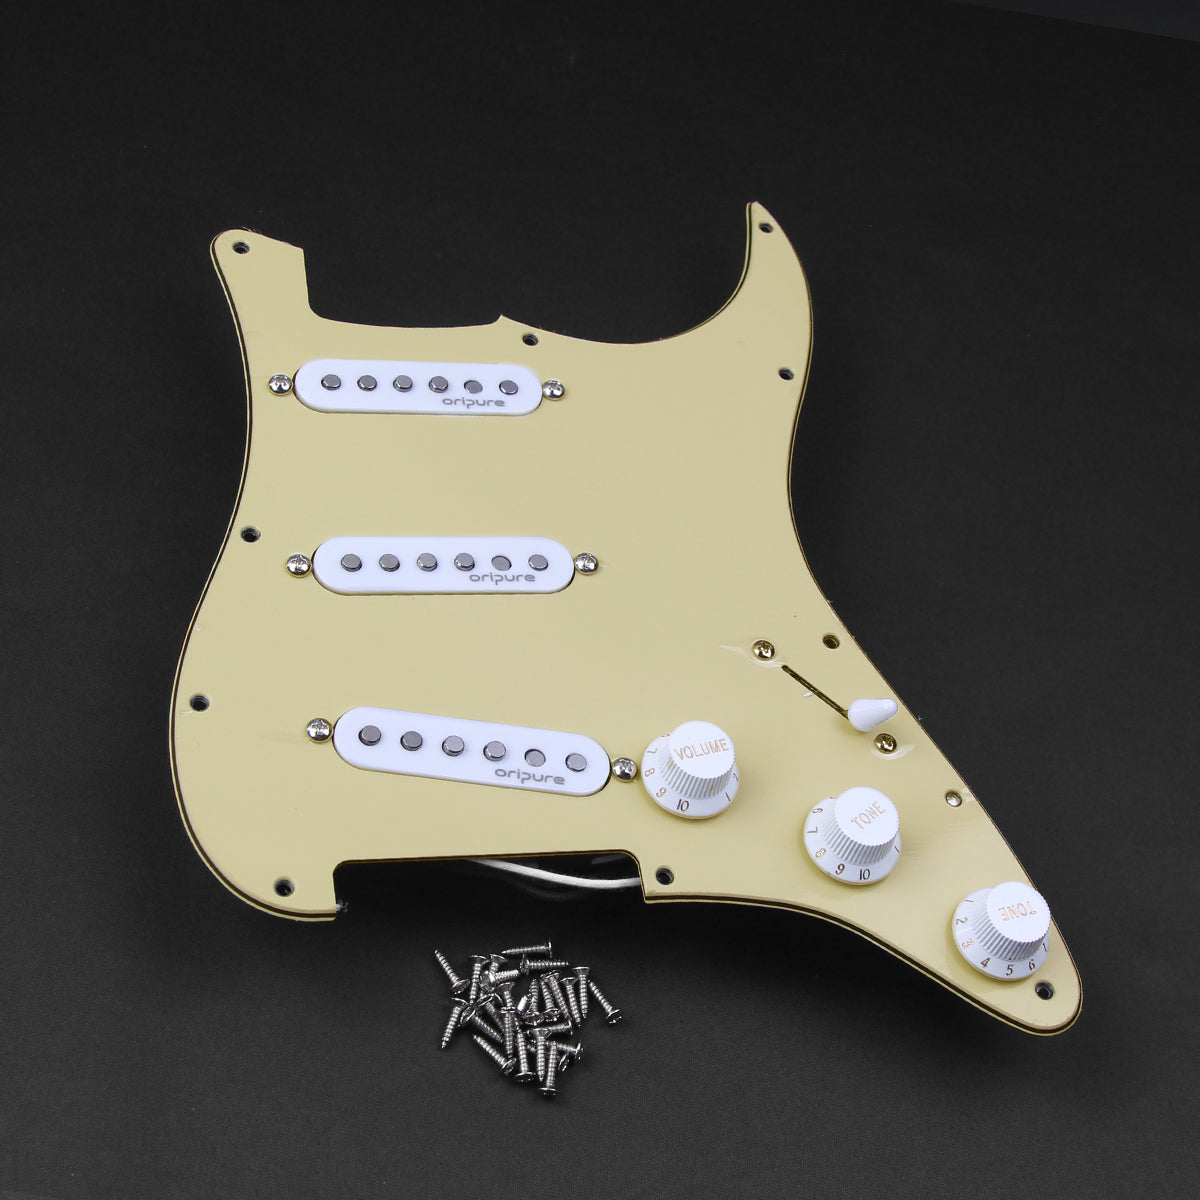 OriPure Loaded Prewired Strat SSS Guitar Pickguard with Alnico 5 Single Coil Pickups